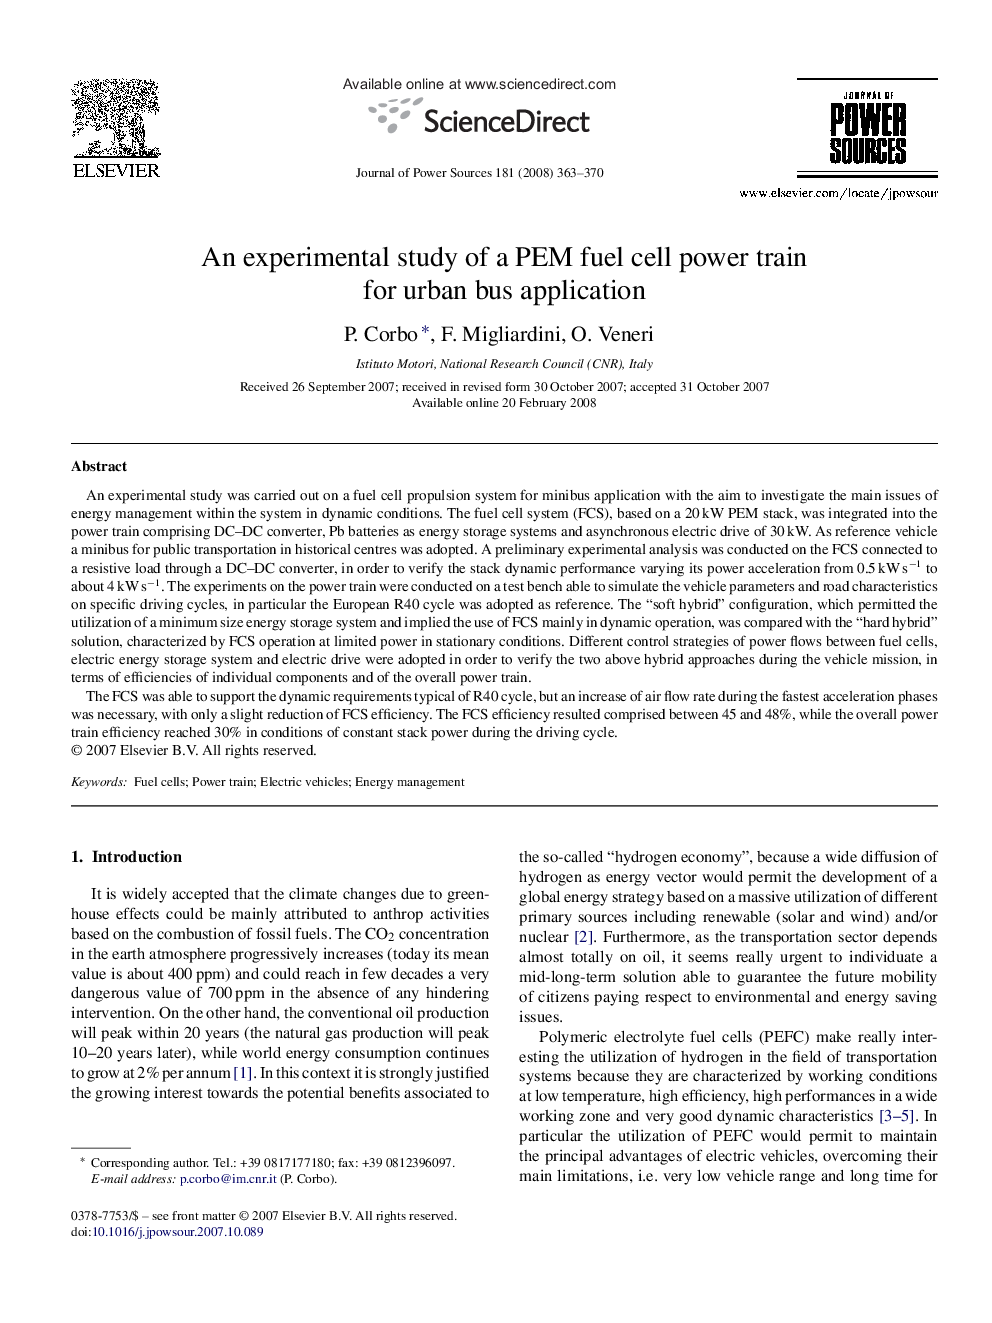 An experimental study of a PEM fuel cell power train for urban bus application